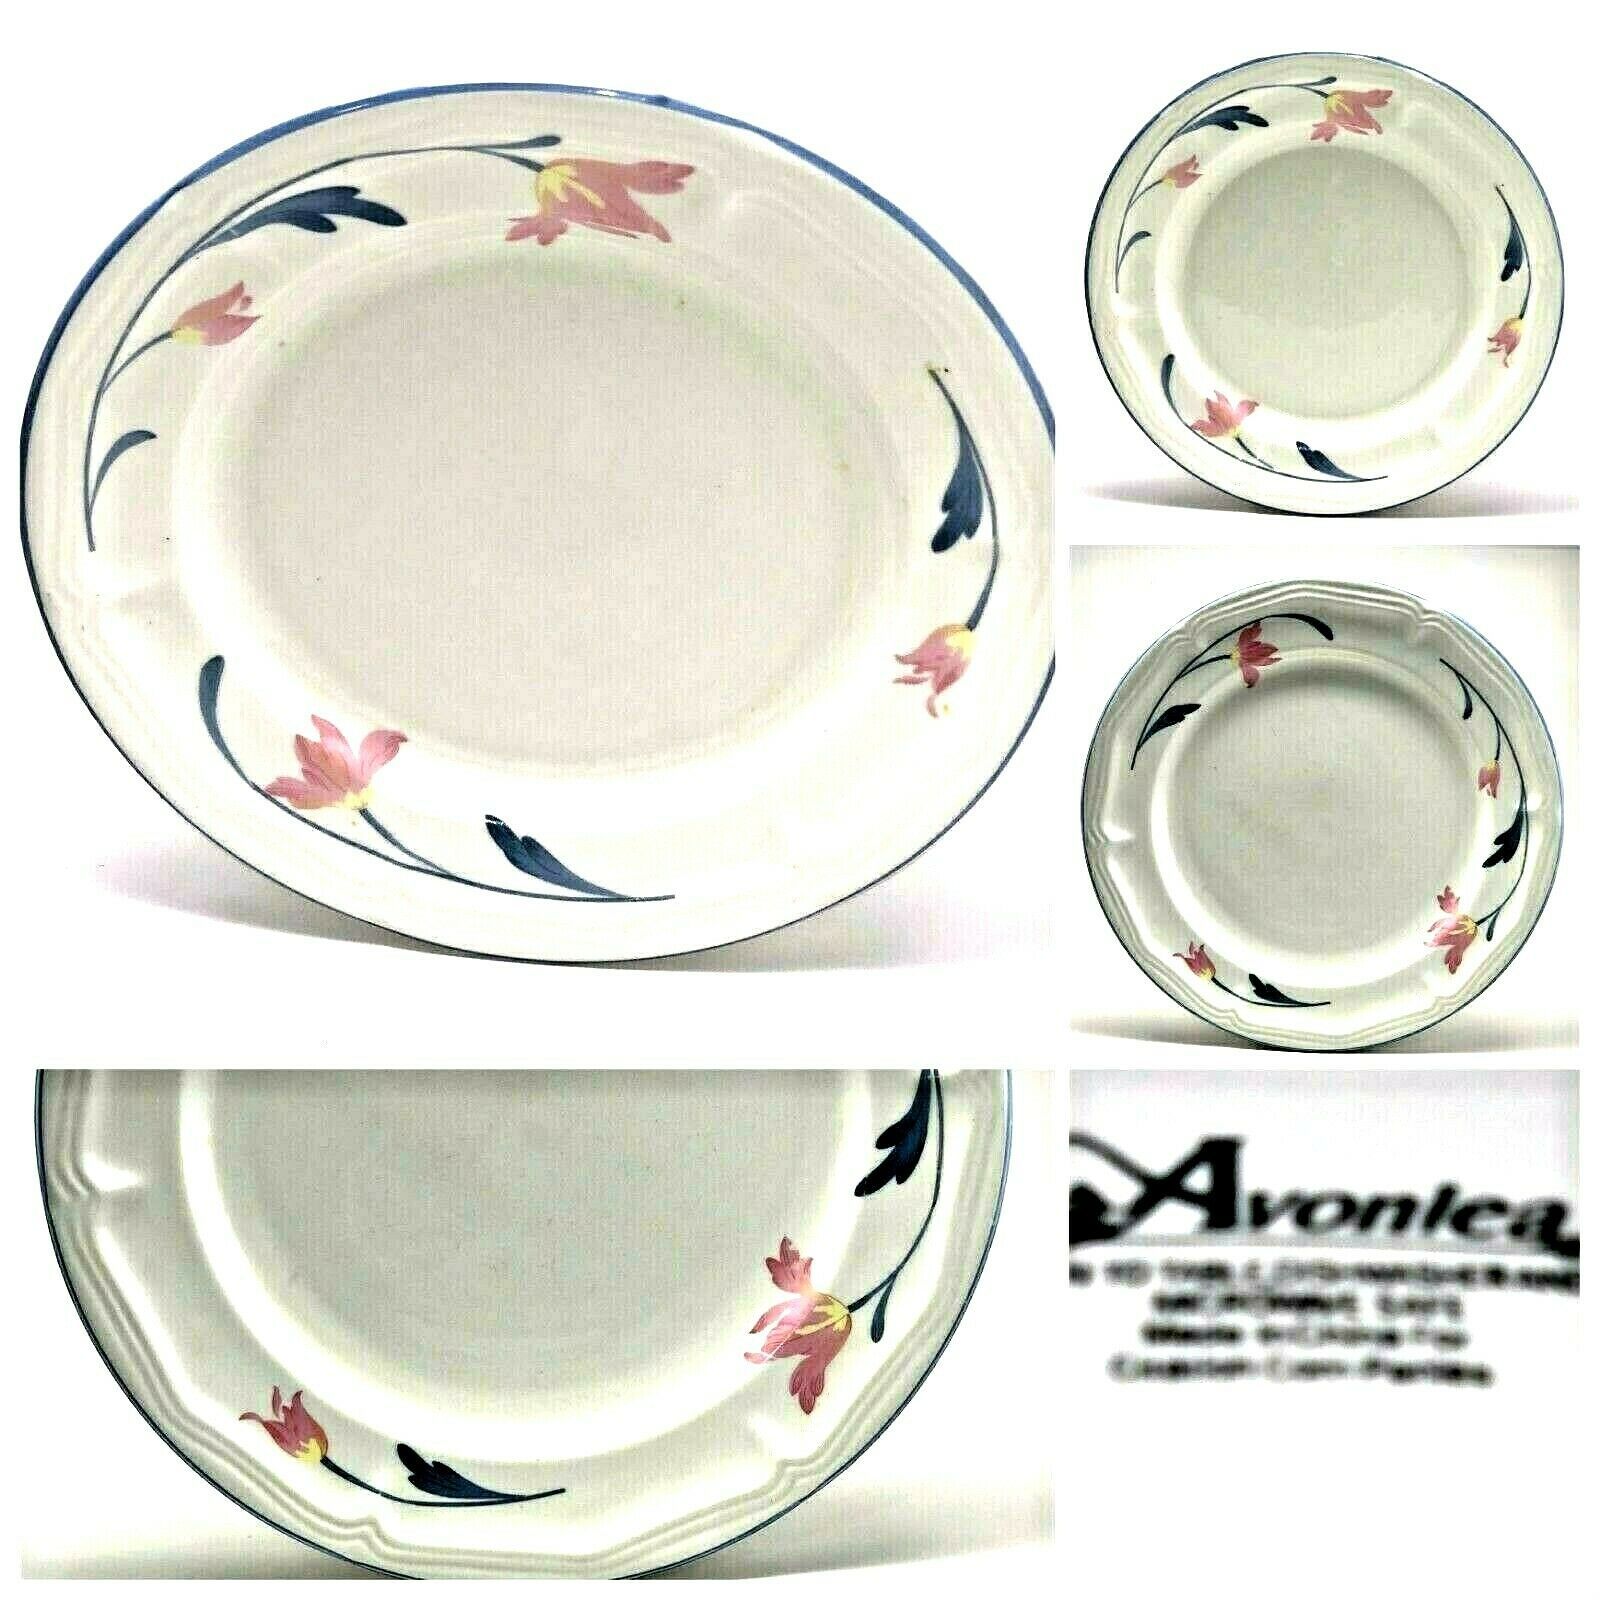 Citation "CORN PANSIES" Avonlea Dinnerware Collection Oven to Table - $4.94 - $7.91